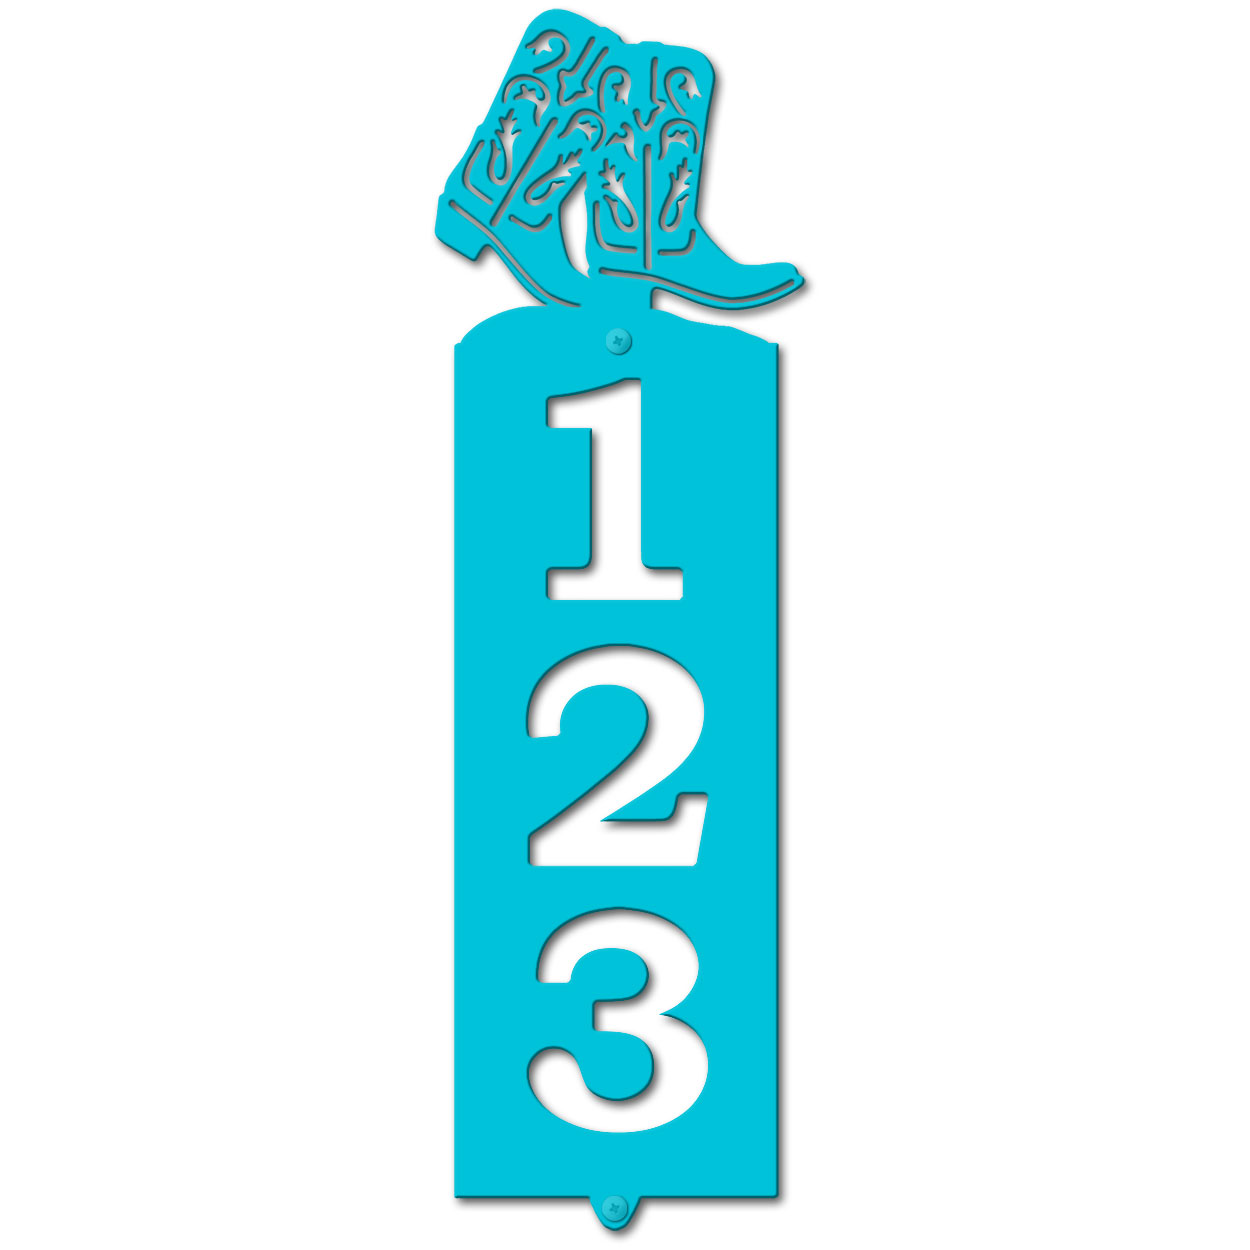 635033 - Boots Cut Outs Three Digit Address Number Plaque